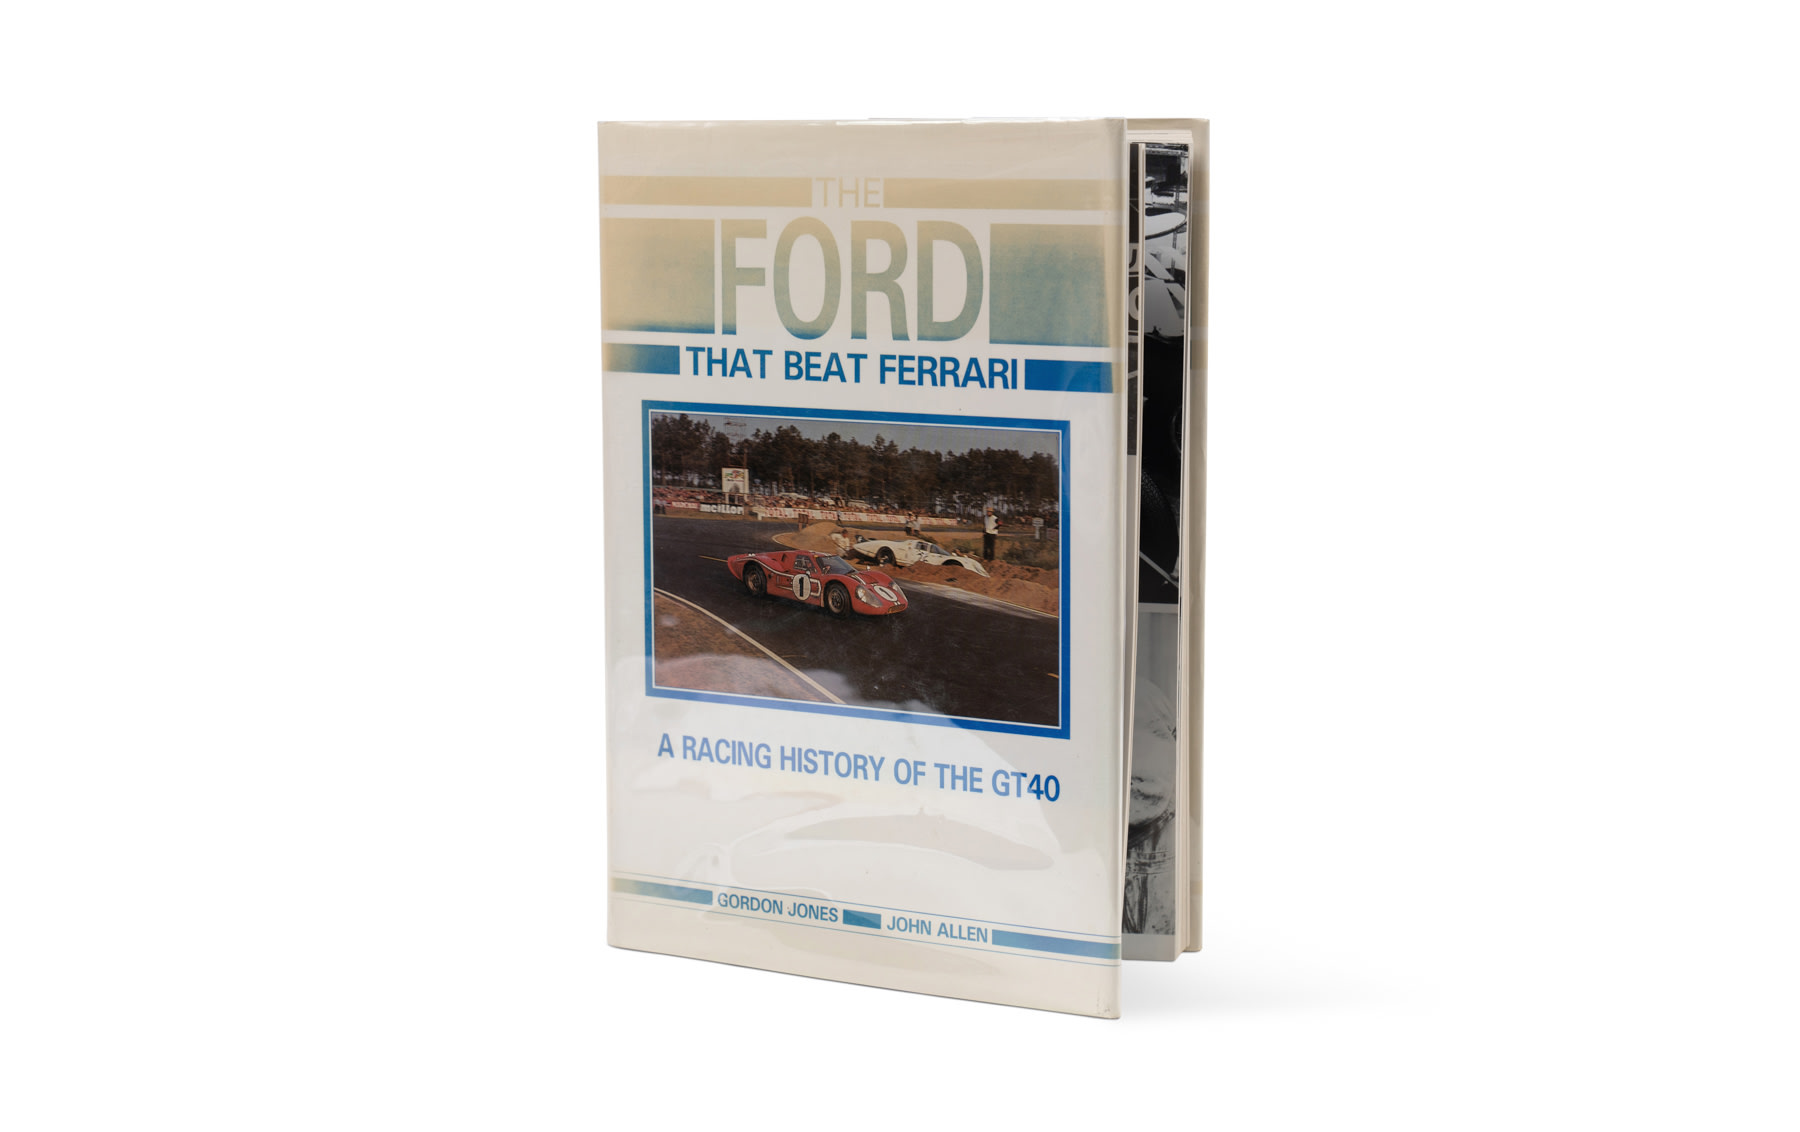 The Ford That Beat Ferrari: A Racing History of the GT40 by Gordon Jones and John Allen